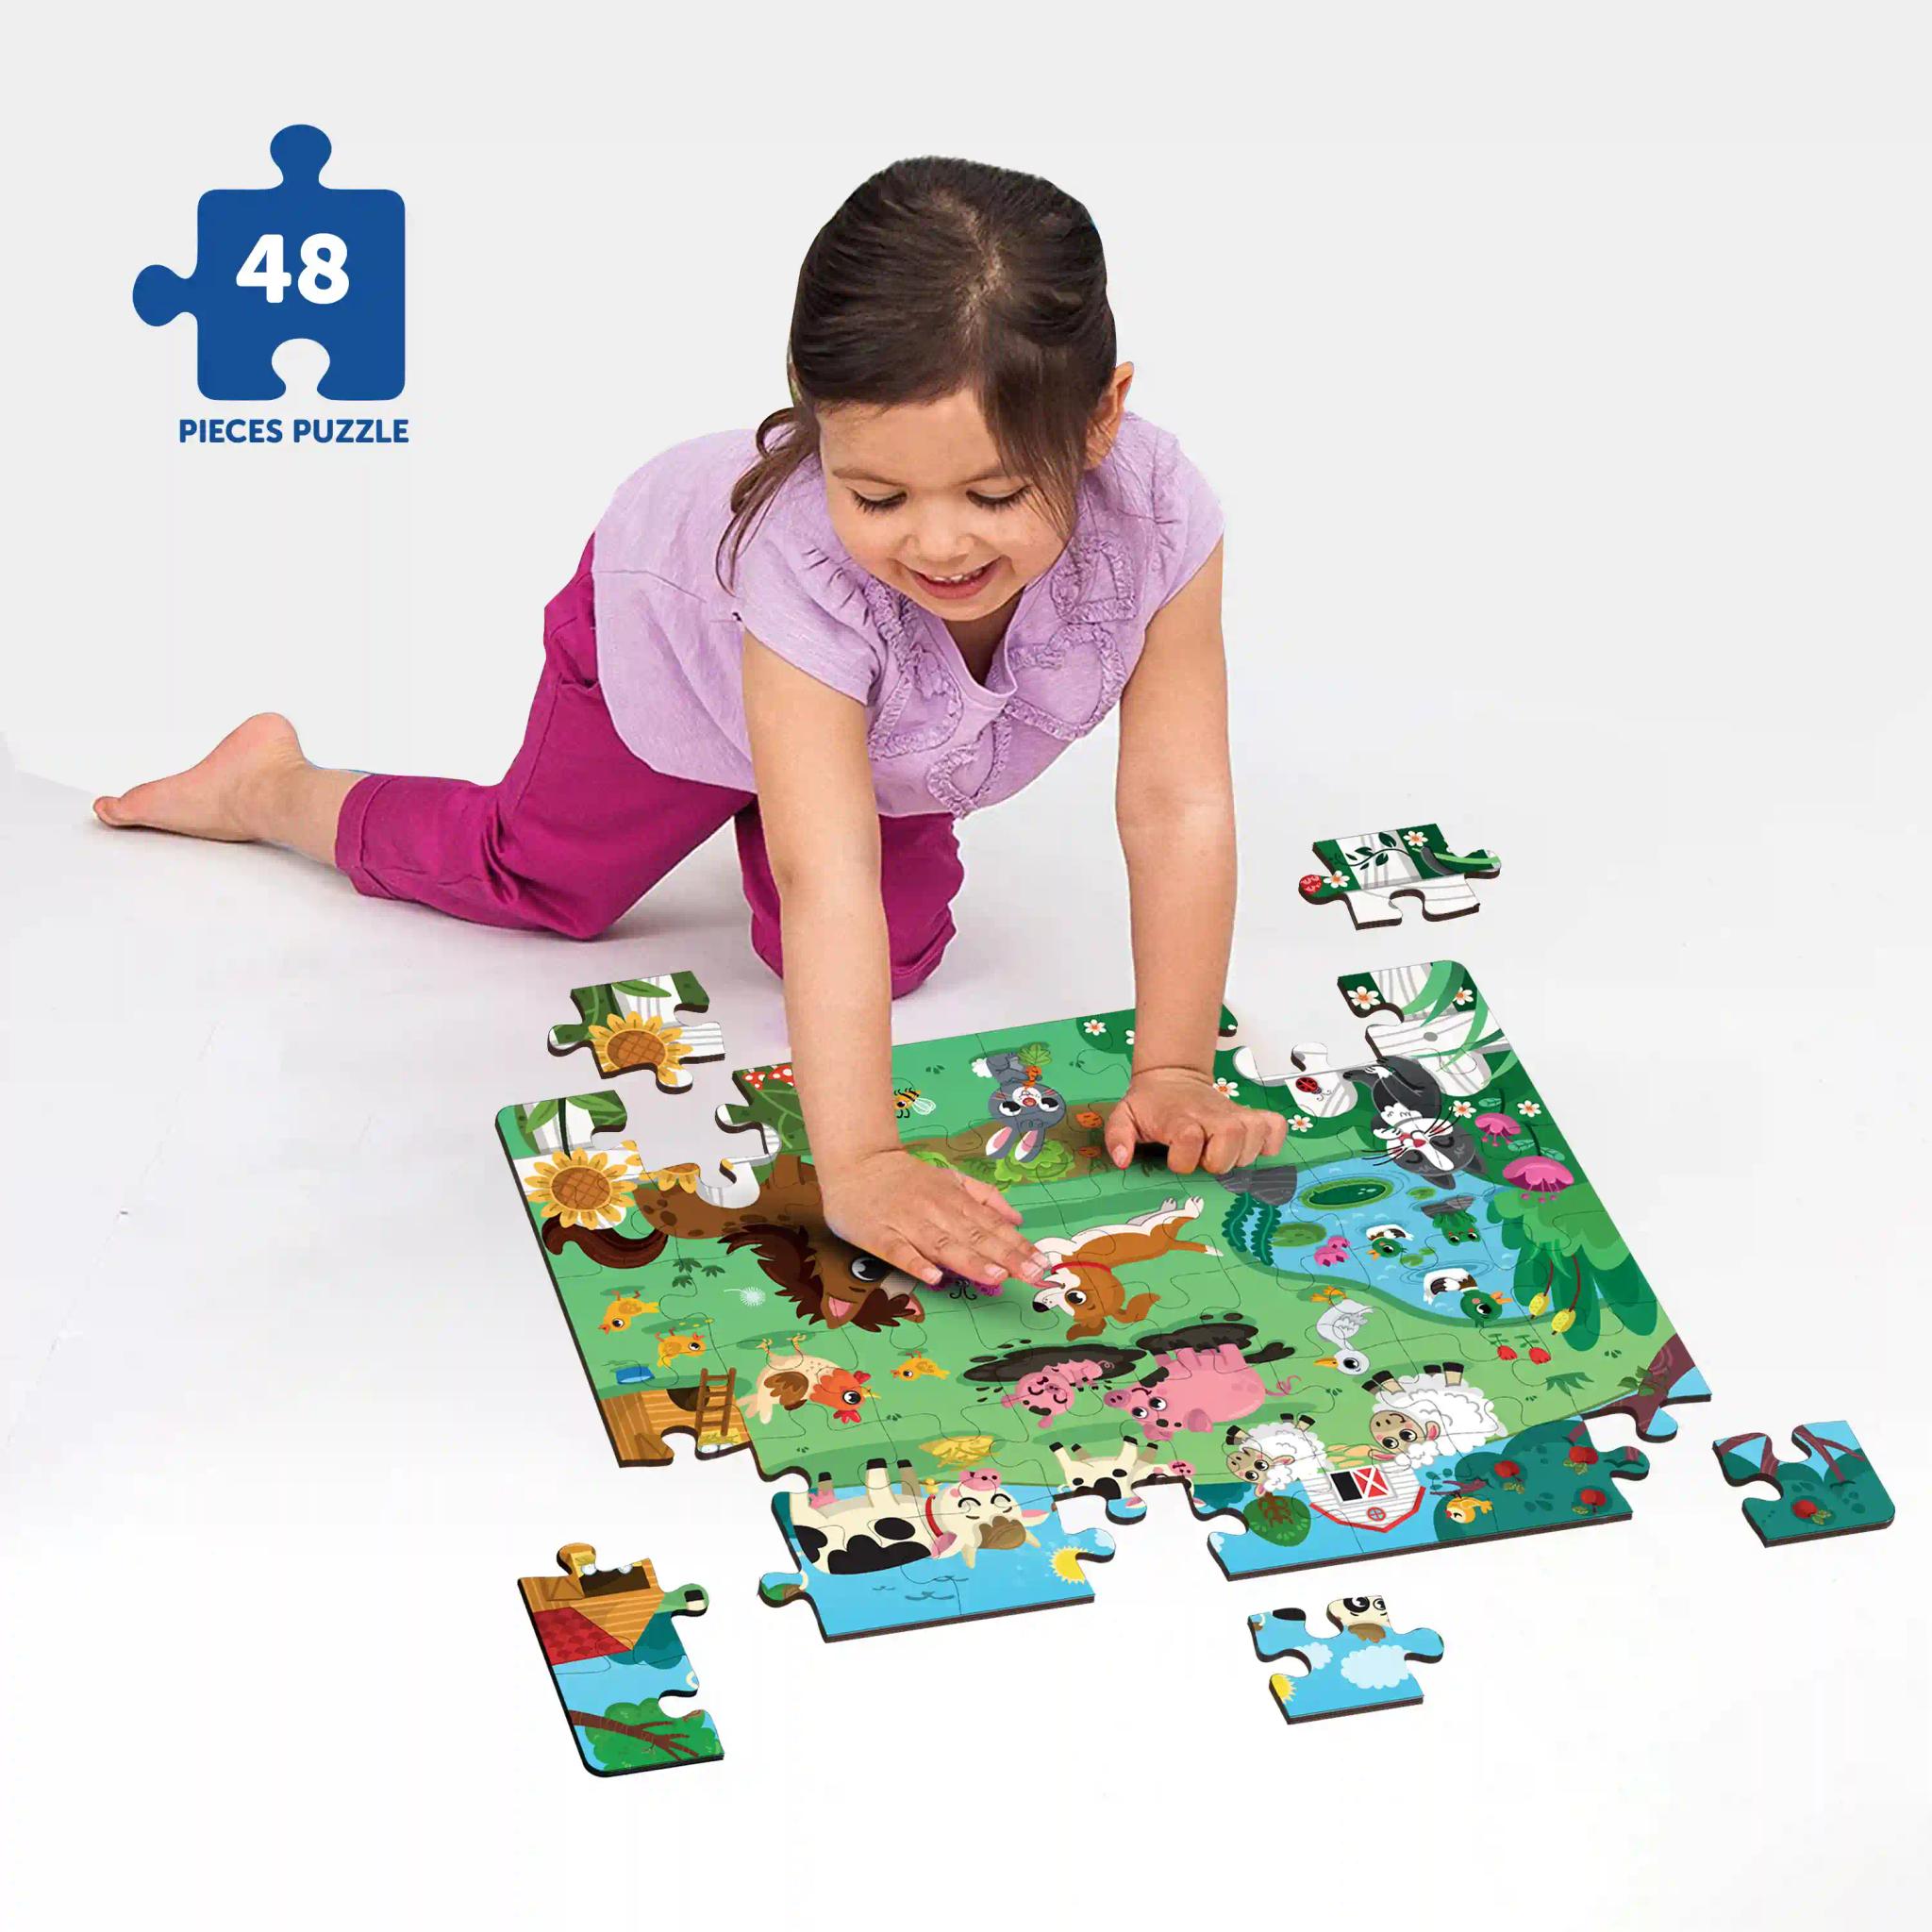 Mini Leaves Farm Animal Premium Wooden Floor Puzzle for Kids 48 Pieces with Wooden Box